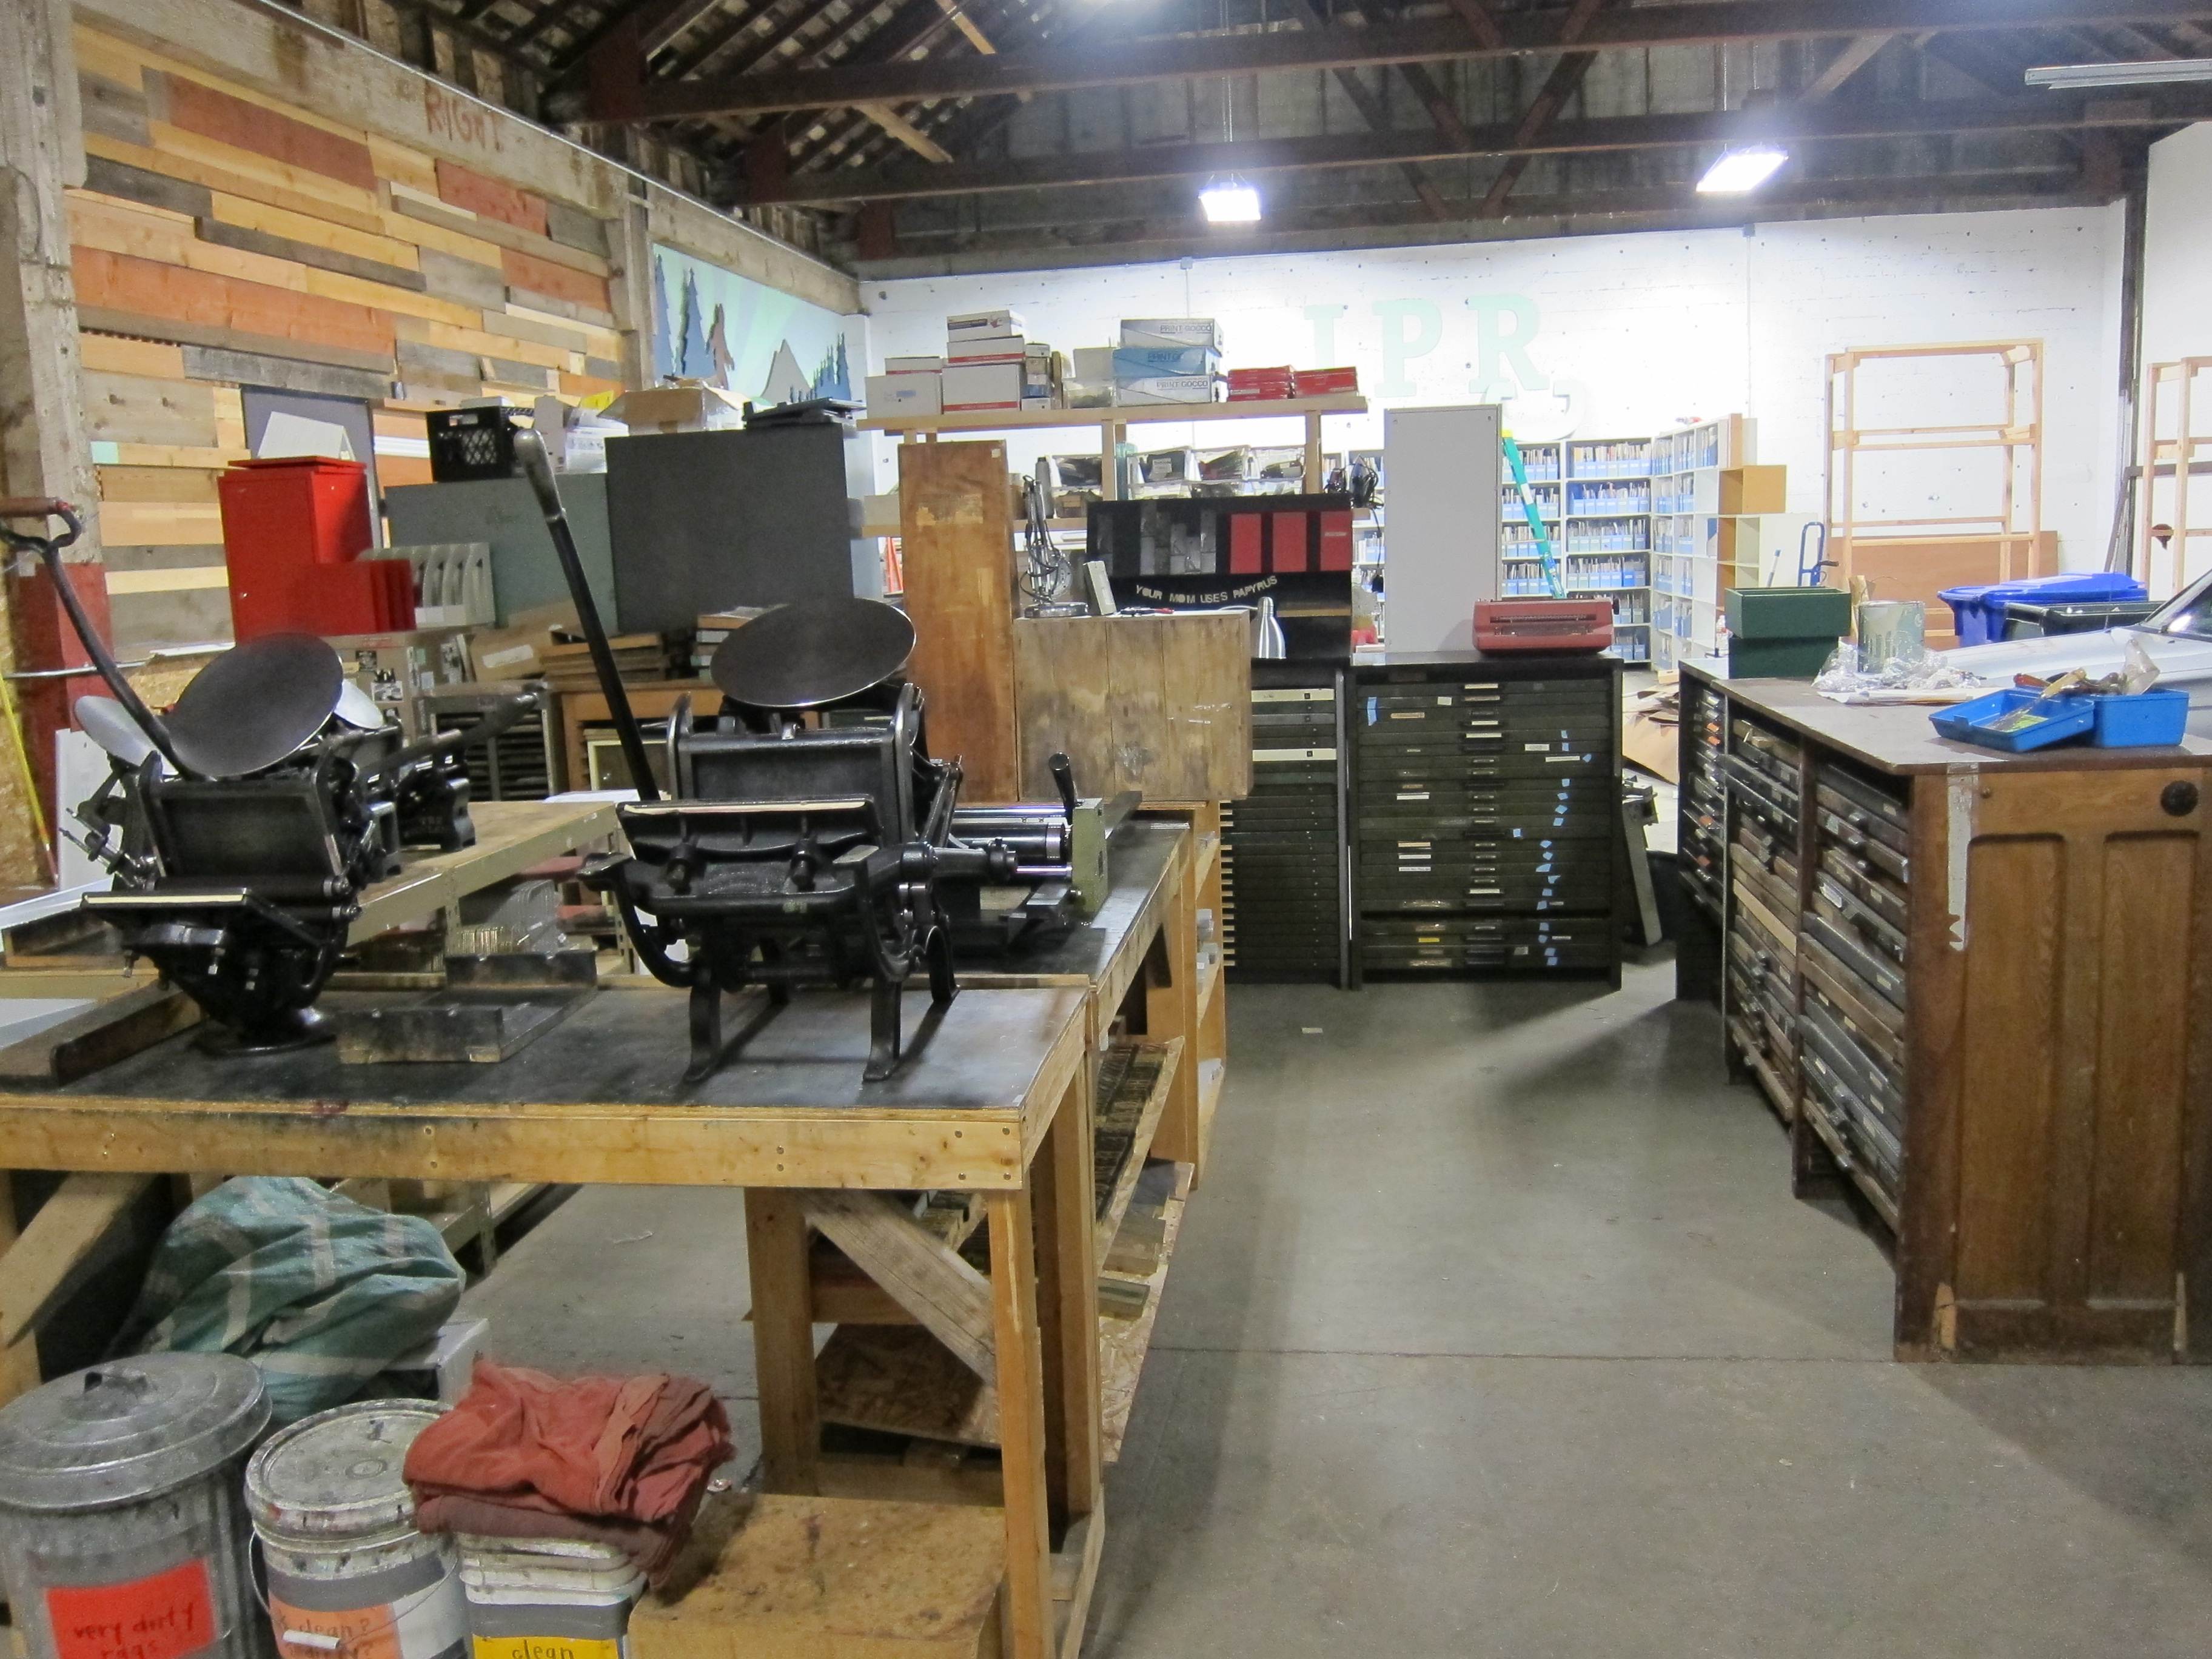 IPRC's new and improved Letterpress Studio, featuring 60 new trays of type